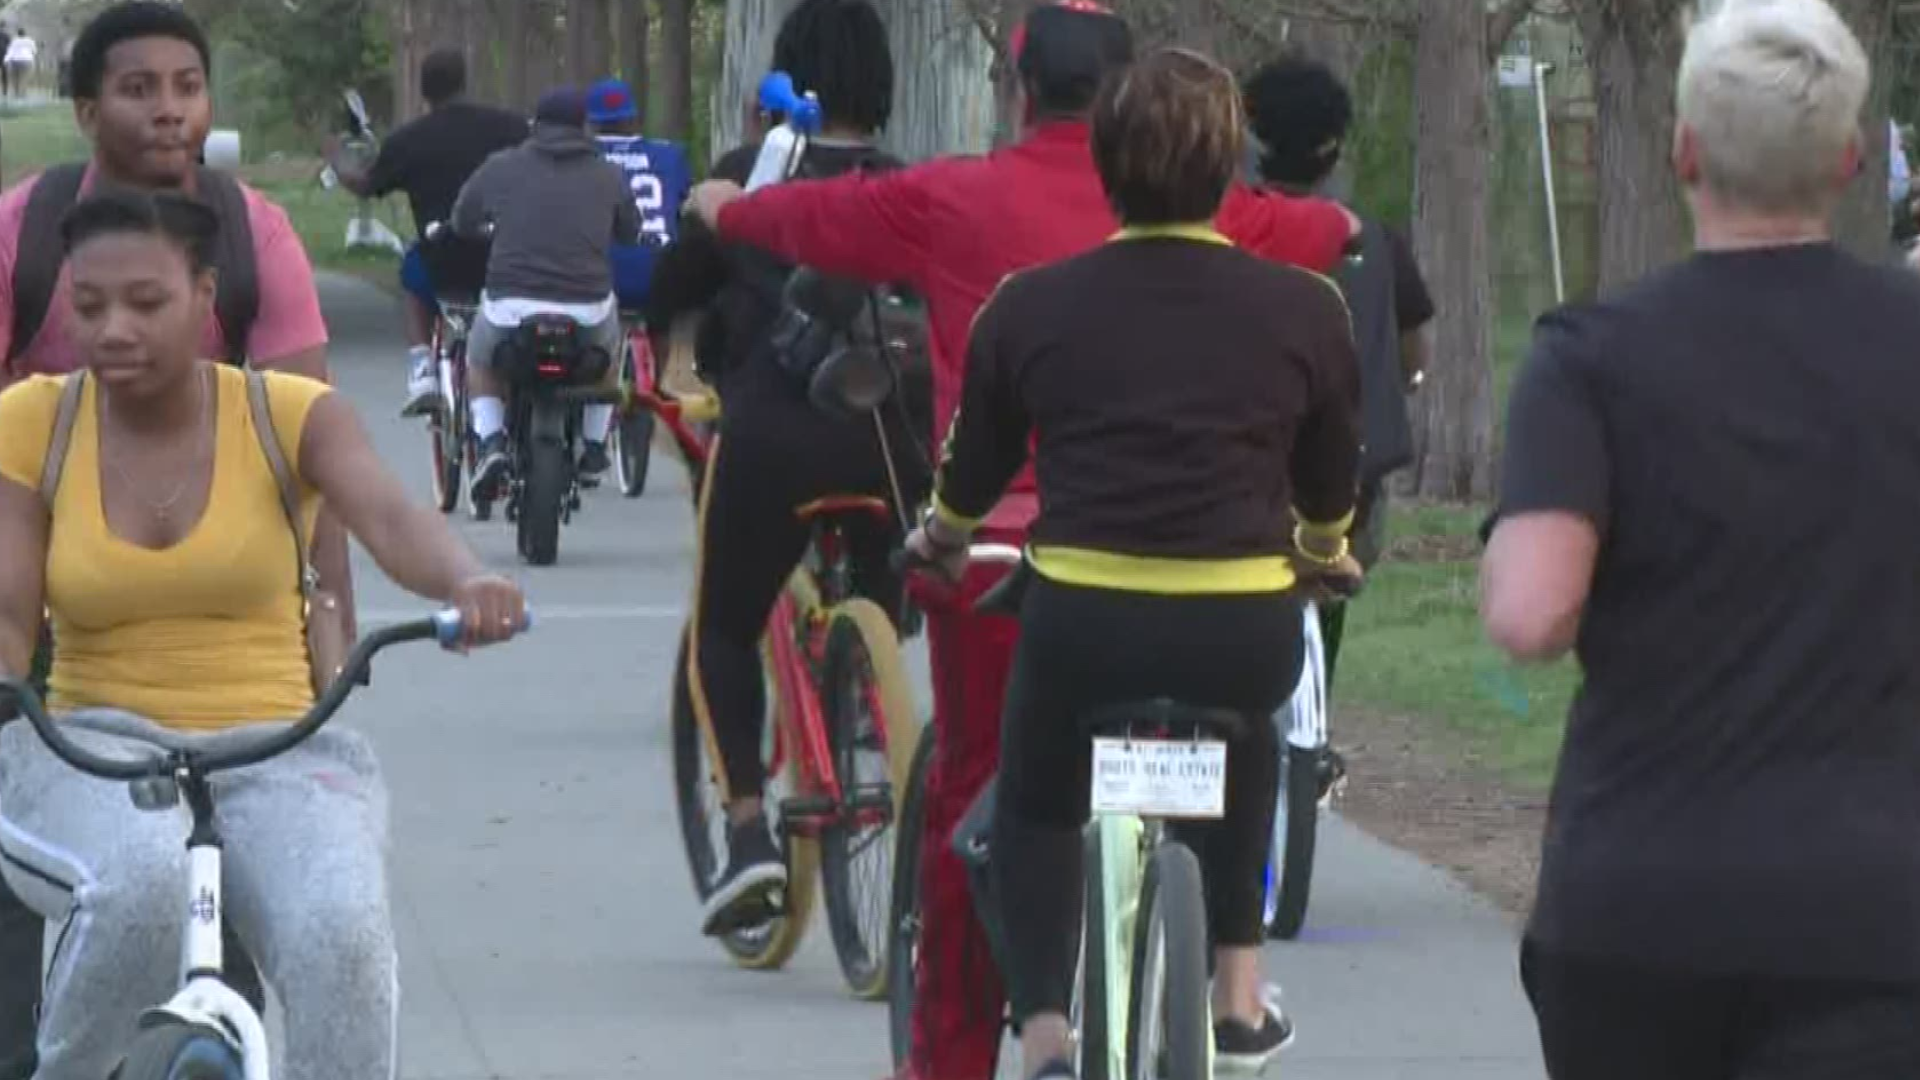 The Atlanta Beltline seemed to be a magnet for visitors during warm spring weather last weekend.